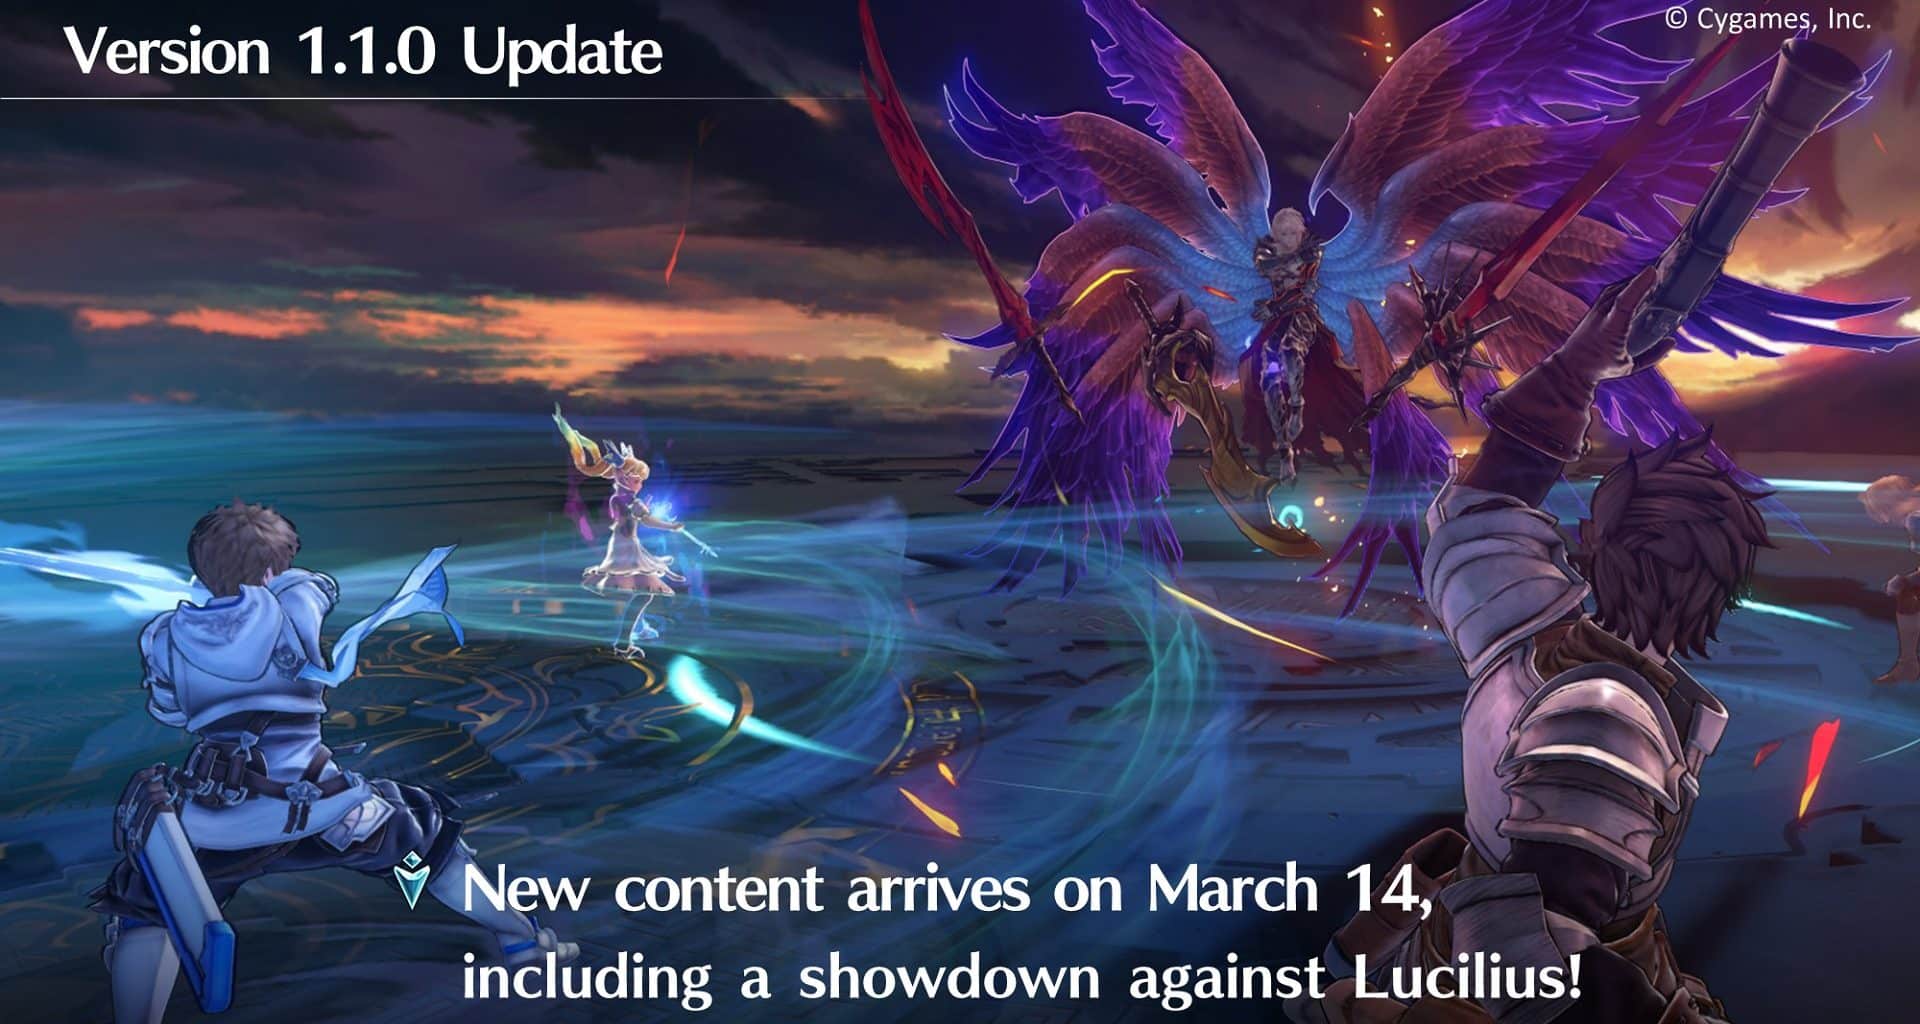 Granblue Fantasy: Relink Adds Lucilius Boss Battle on March 14 3453